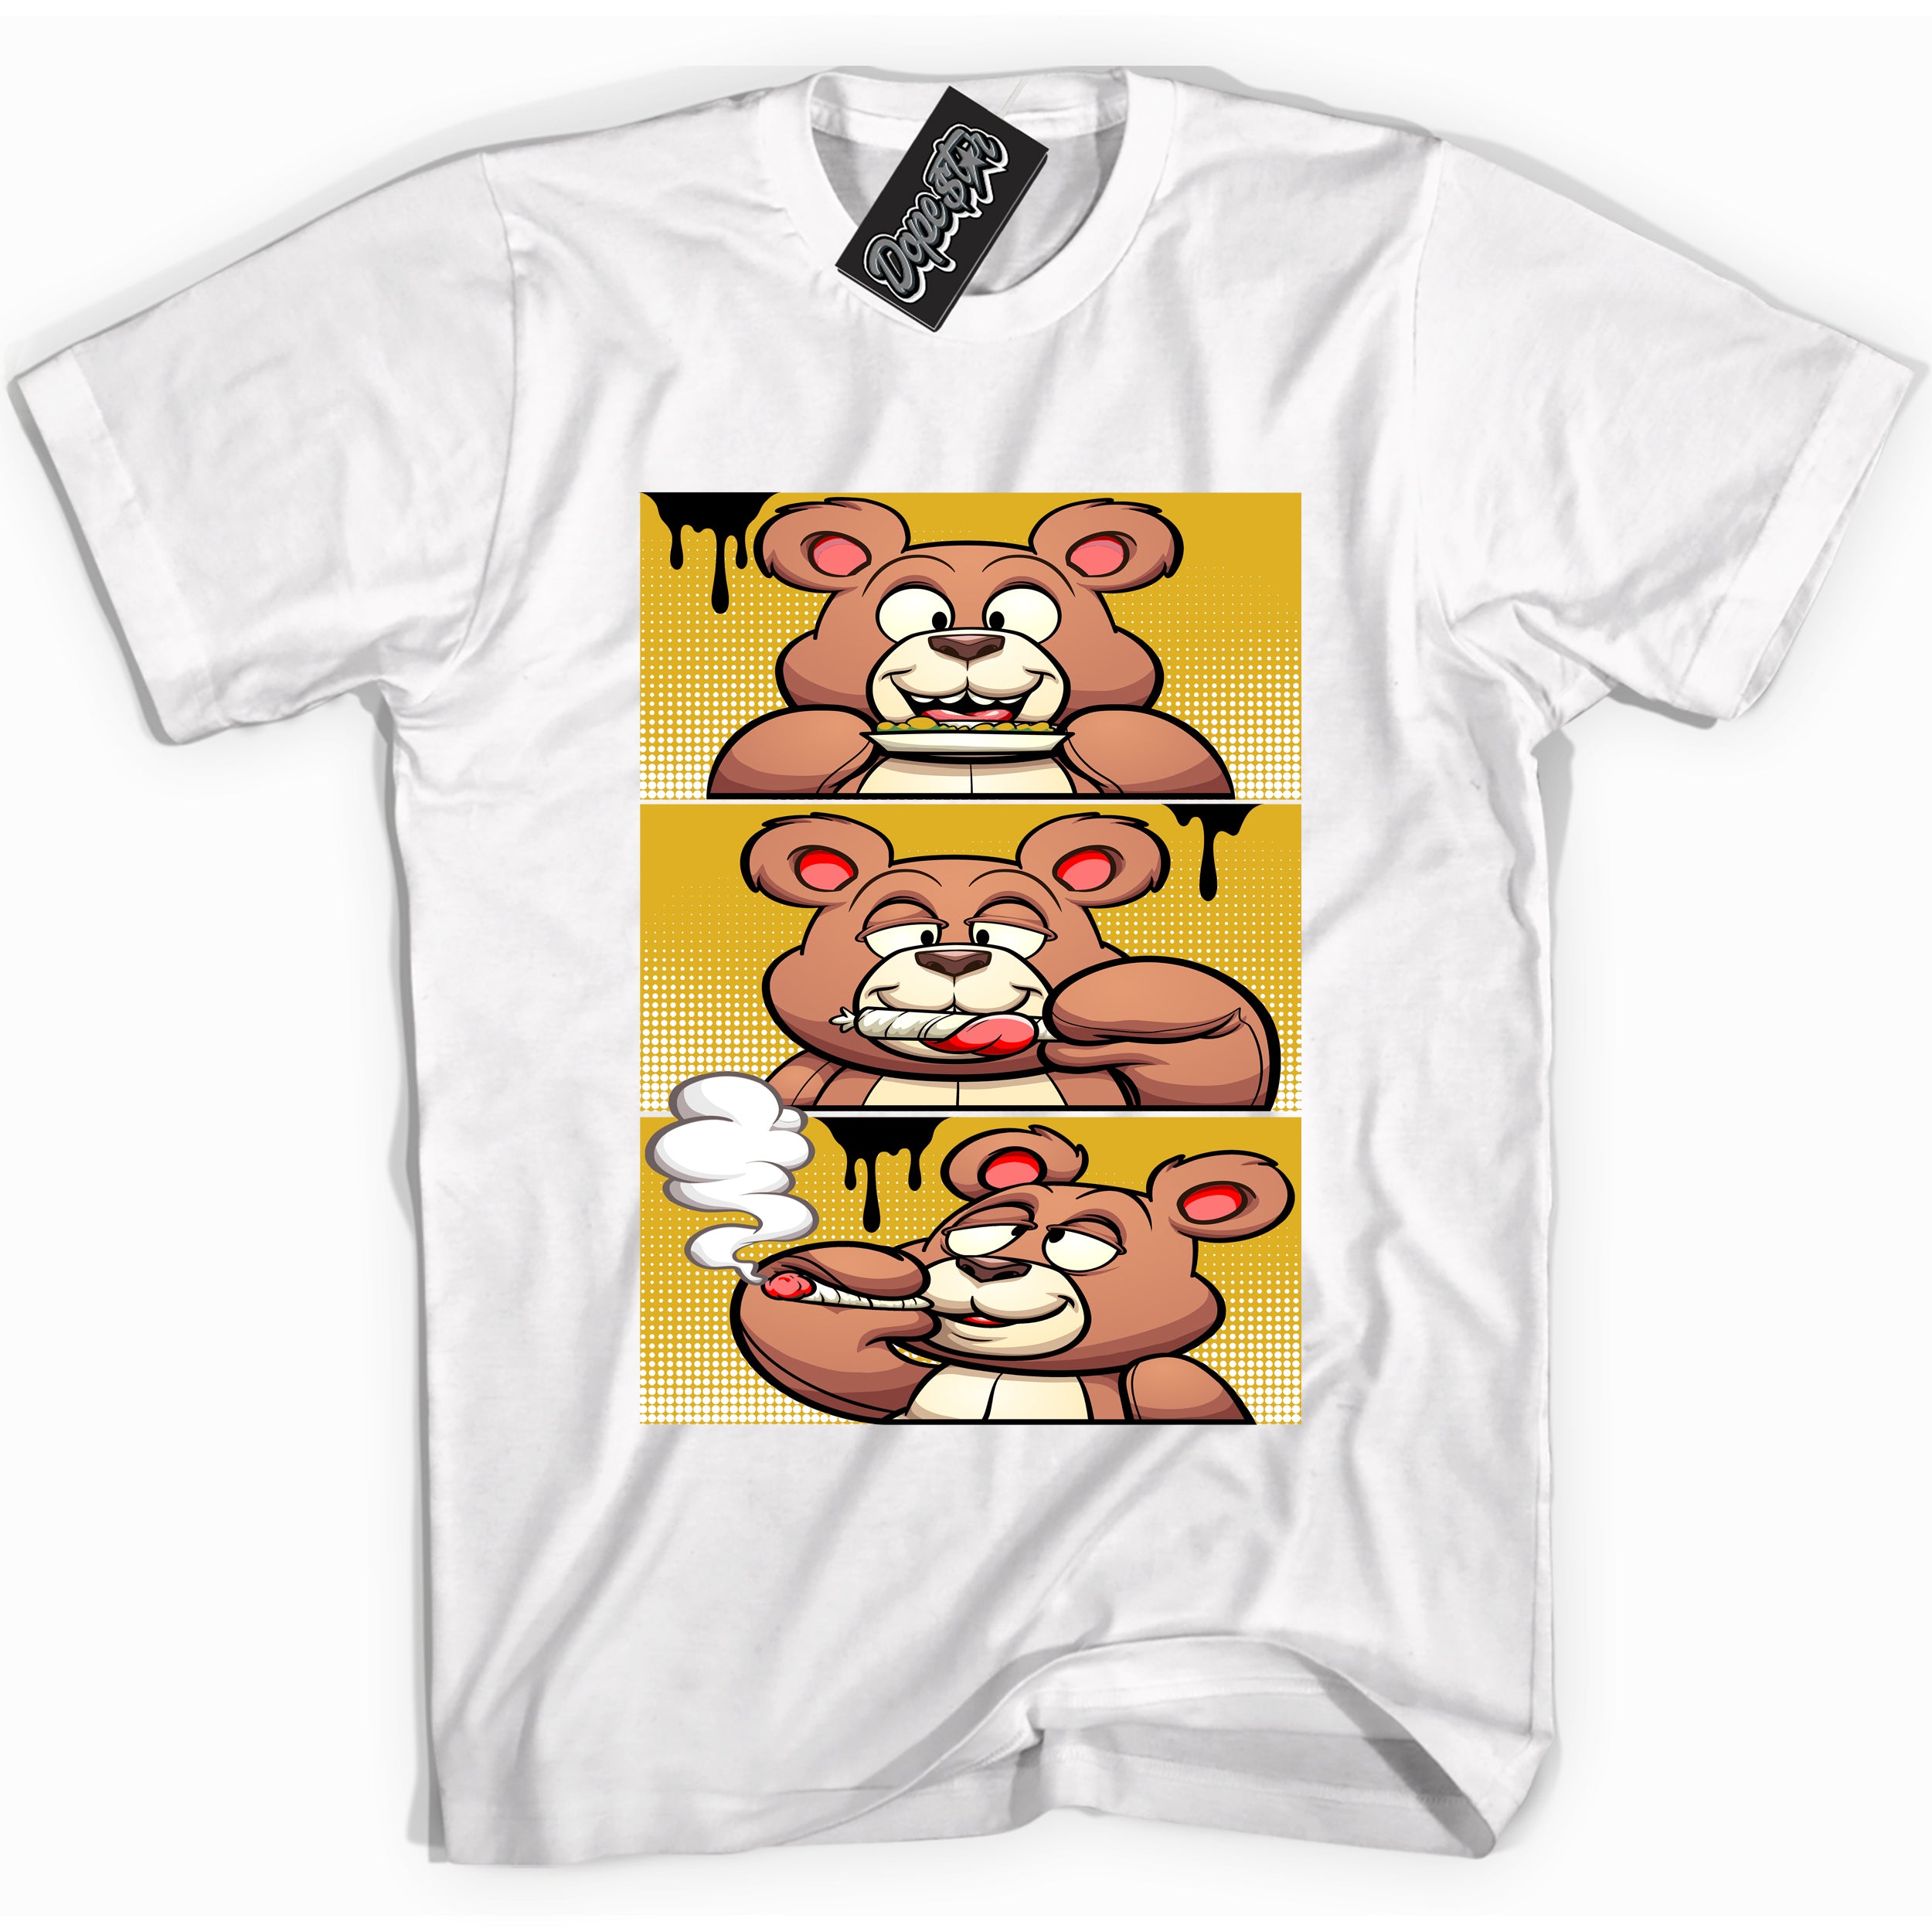 Cool White Shirt with “ Roll It Lick It Smoke It Bear” design that perfectly matches Yellow Ochre 6s Sneakers.